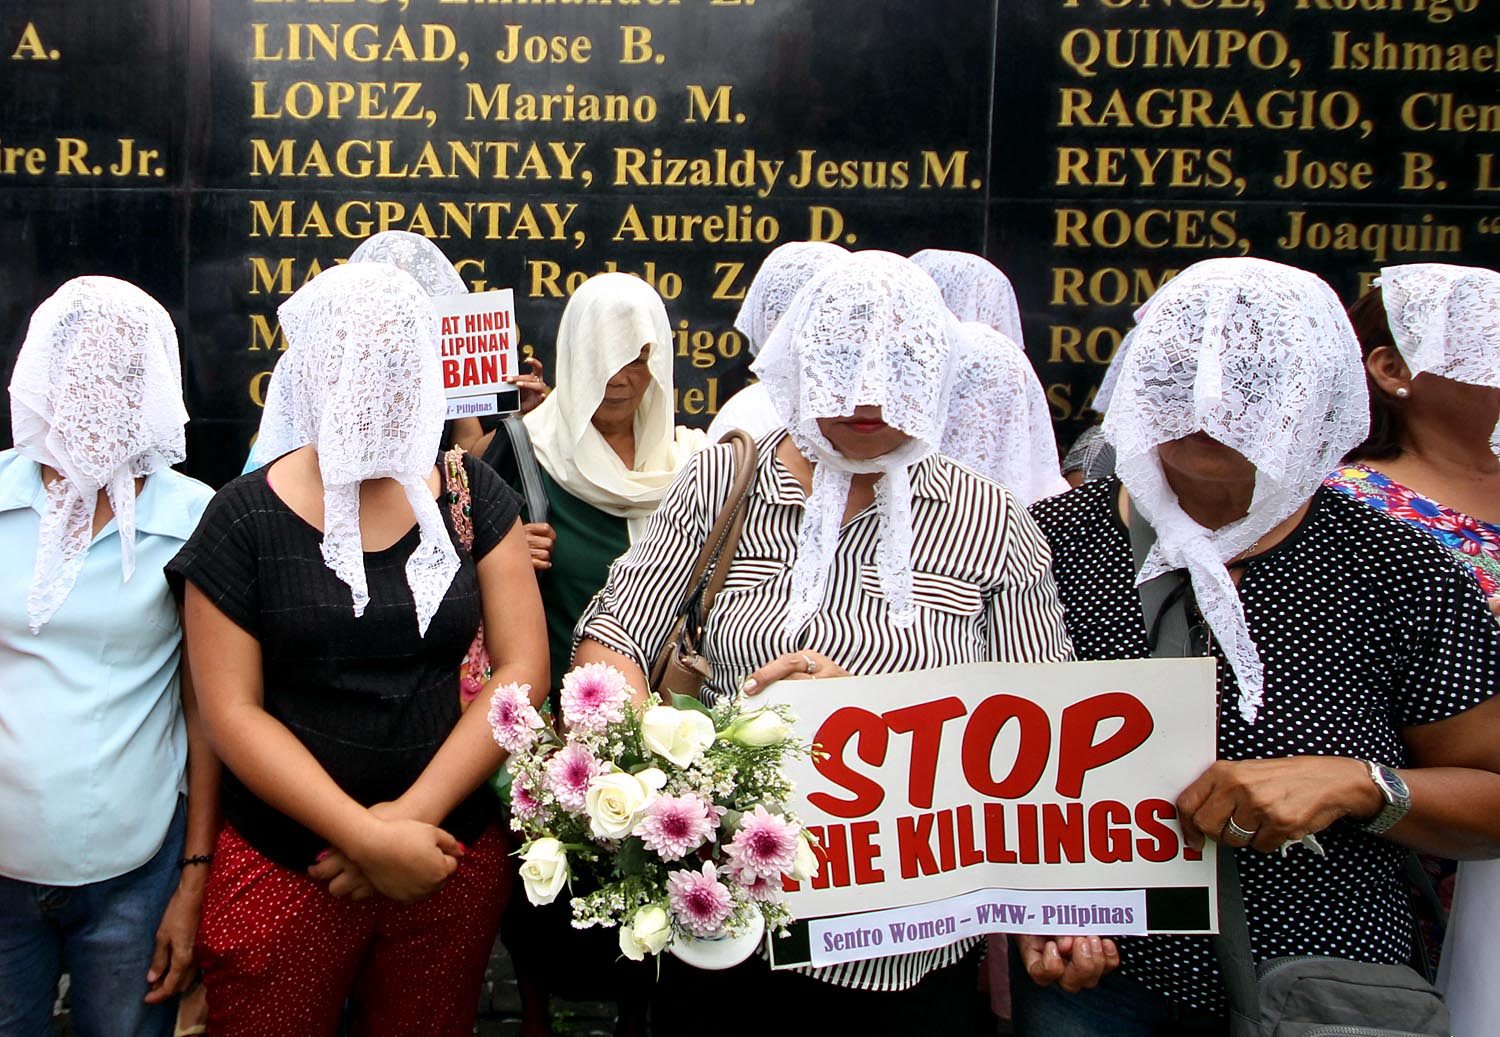 WIDOWS. Relatives of victims of extrajudicial killings wear white veils as they call for justice and reparation during the International Day for the Elimination of Violence Against Women at the Bantayog ng mga Bayani in Quezon City on November 24, 2017. Photo by Darren Langit/Rappler   